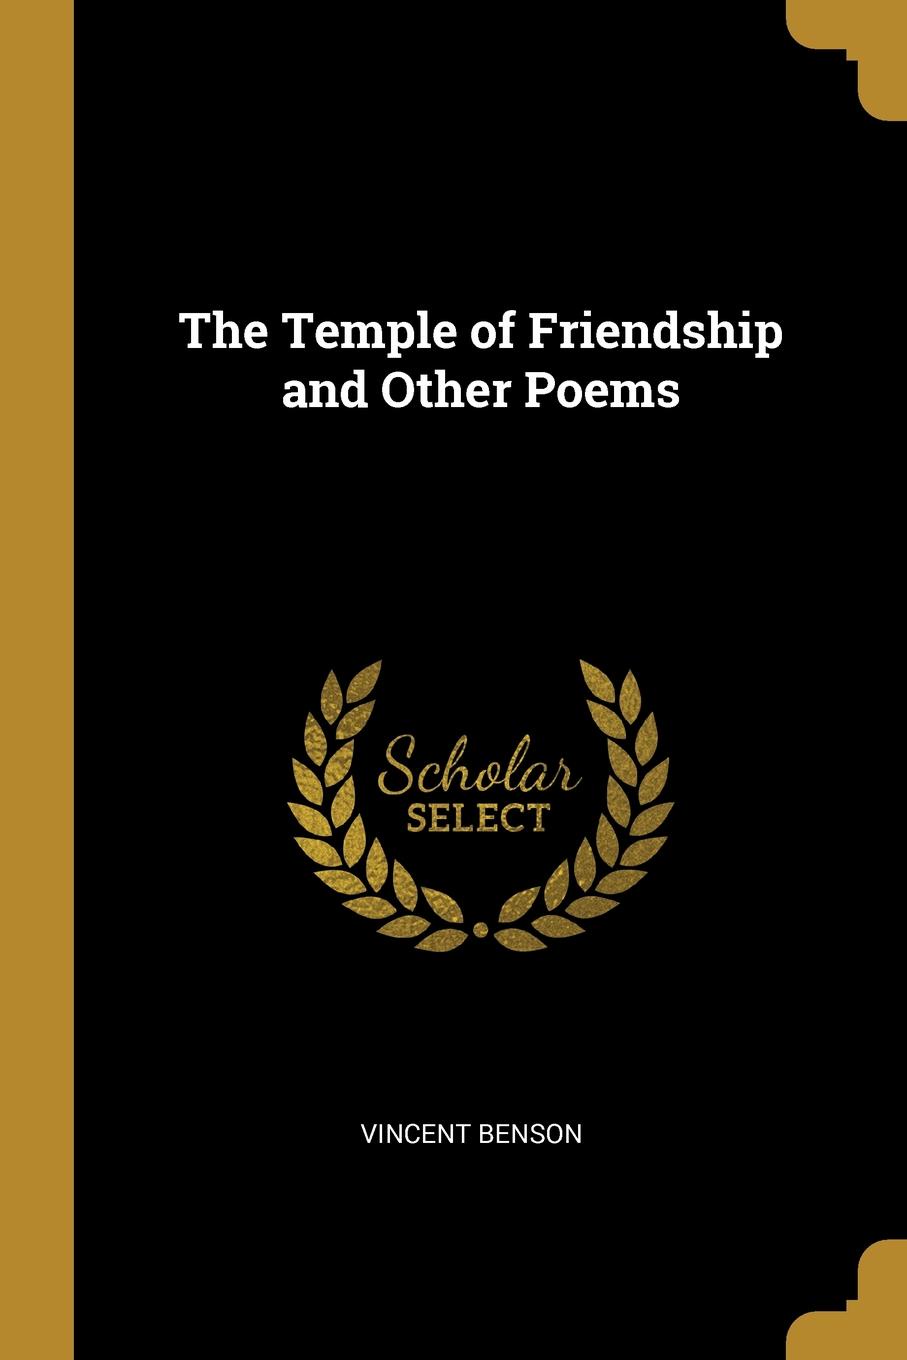 The Temple of Friendship and Other Poems